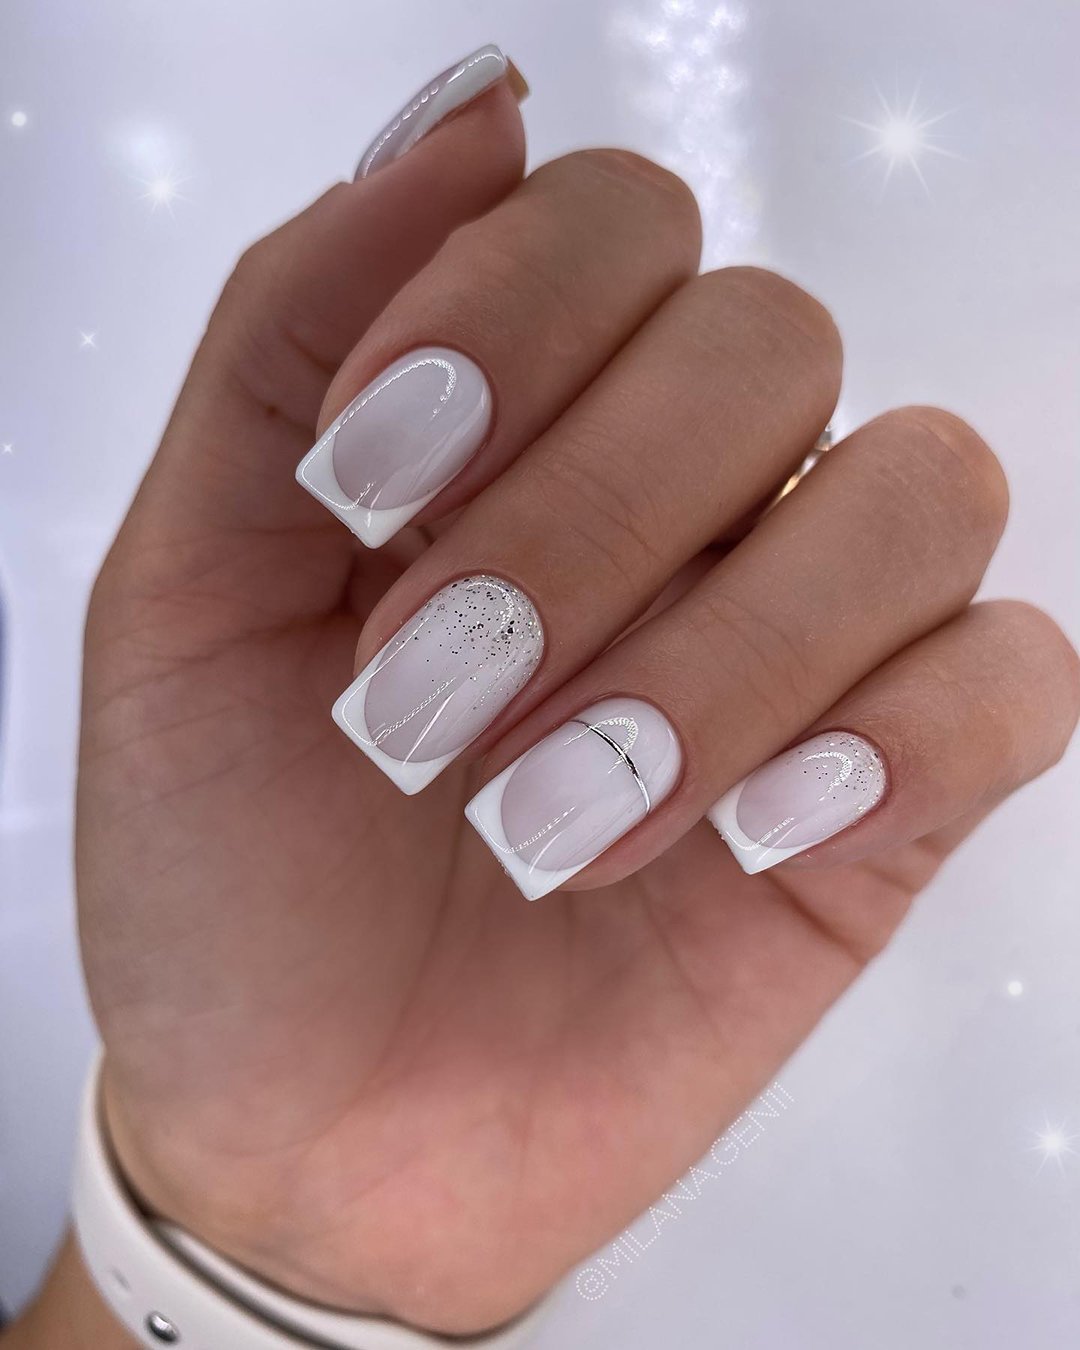 pink and white nails for wedding original french manicure milana.gen11